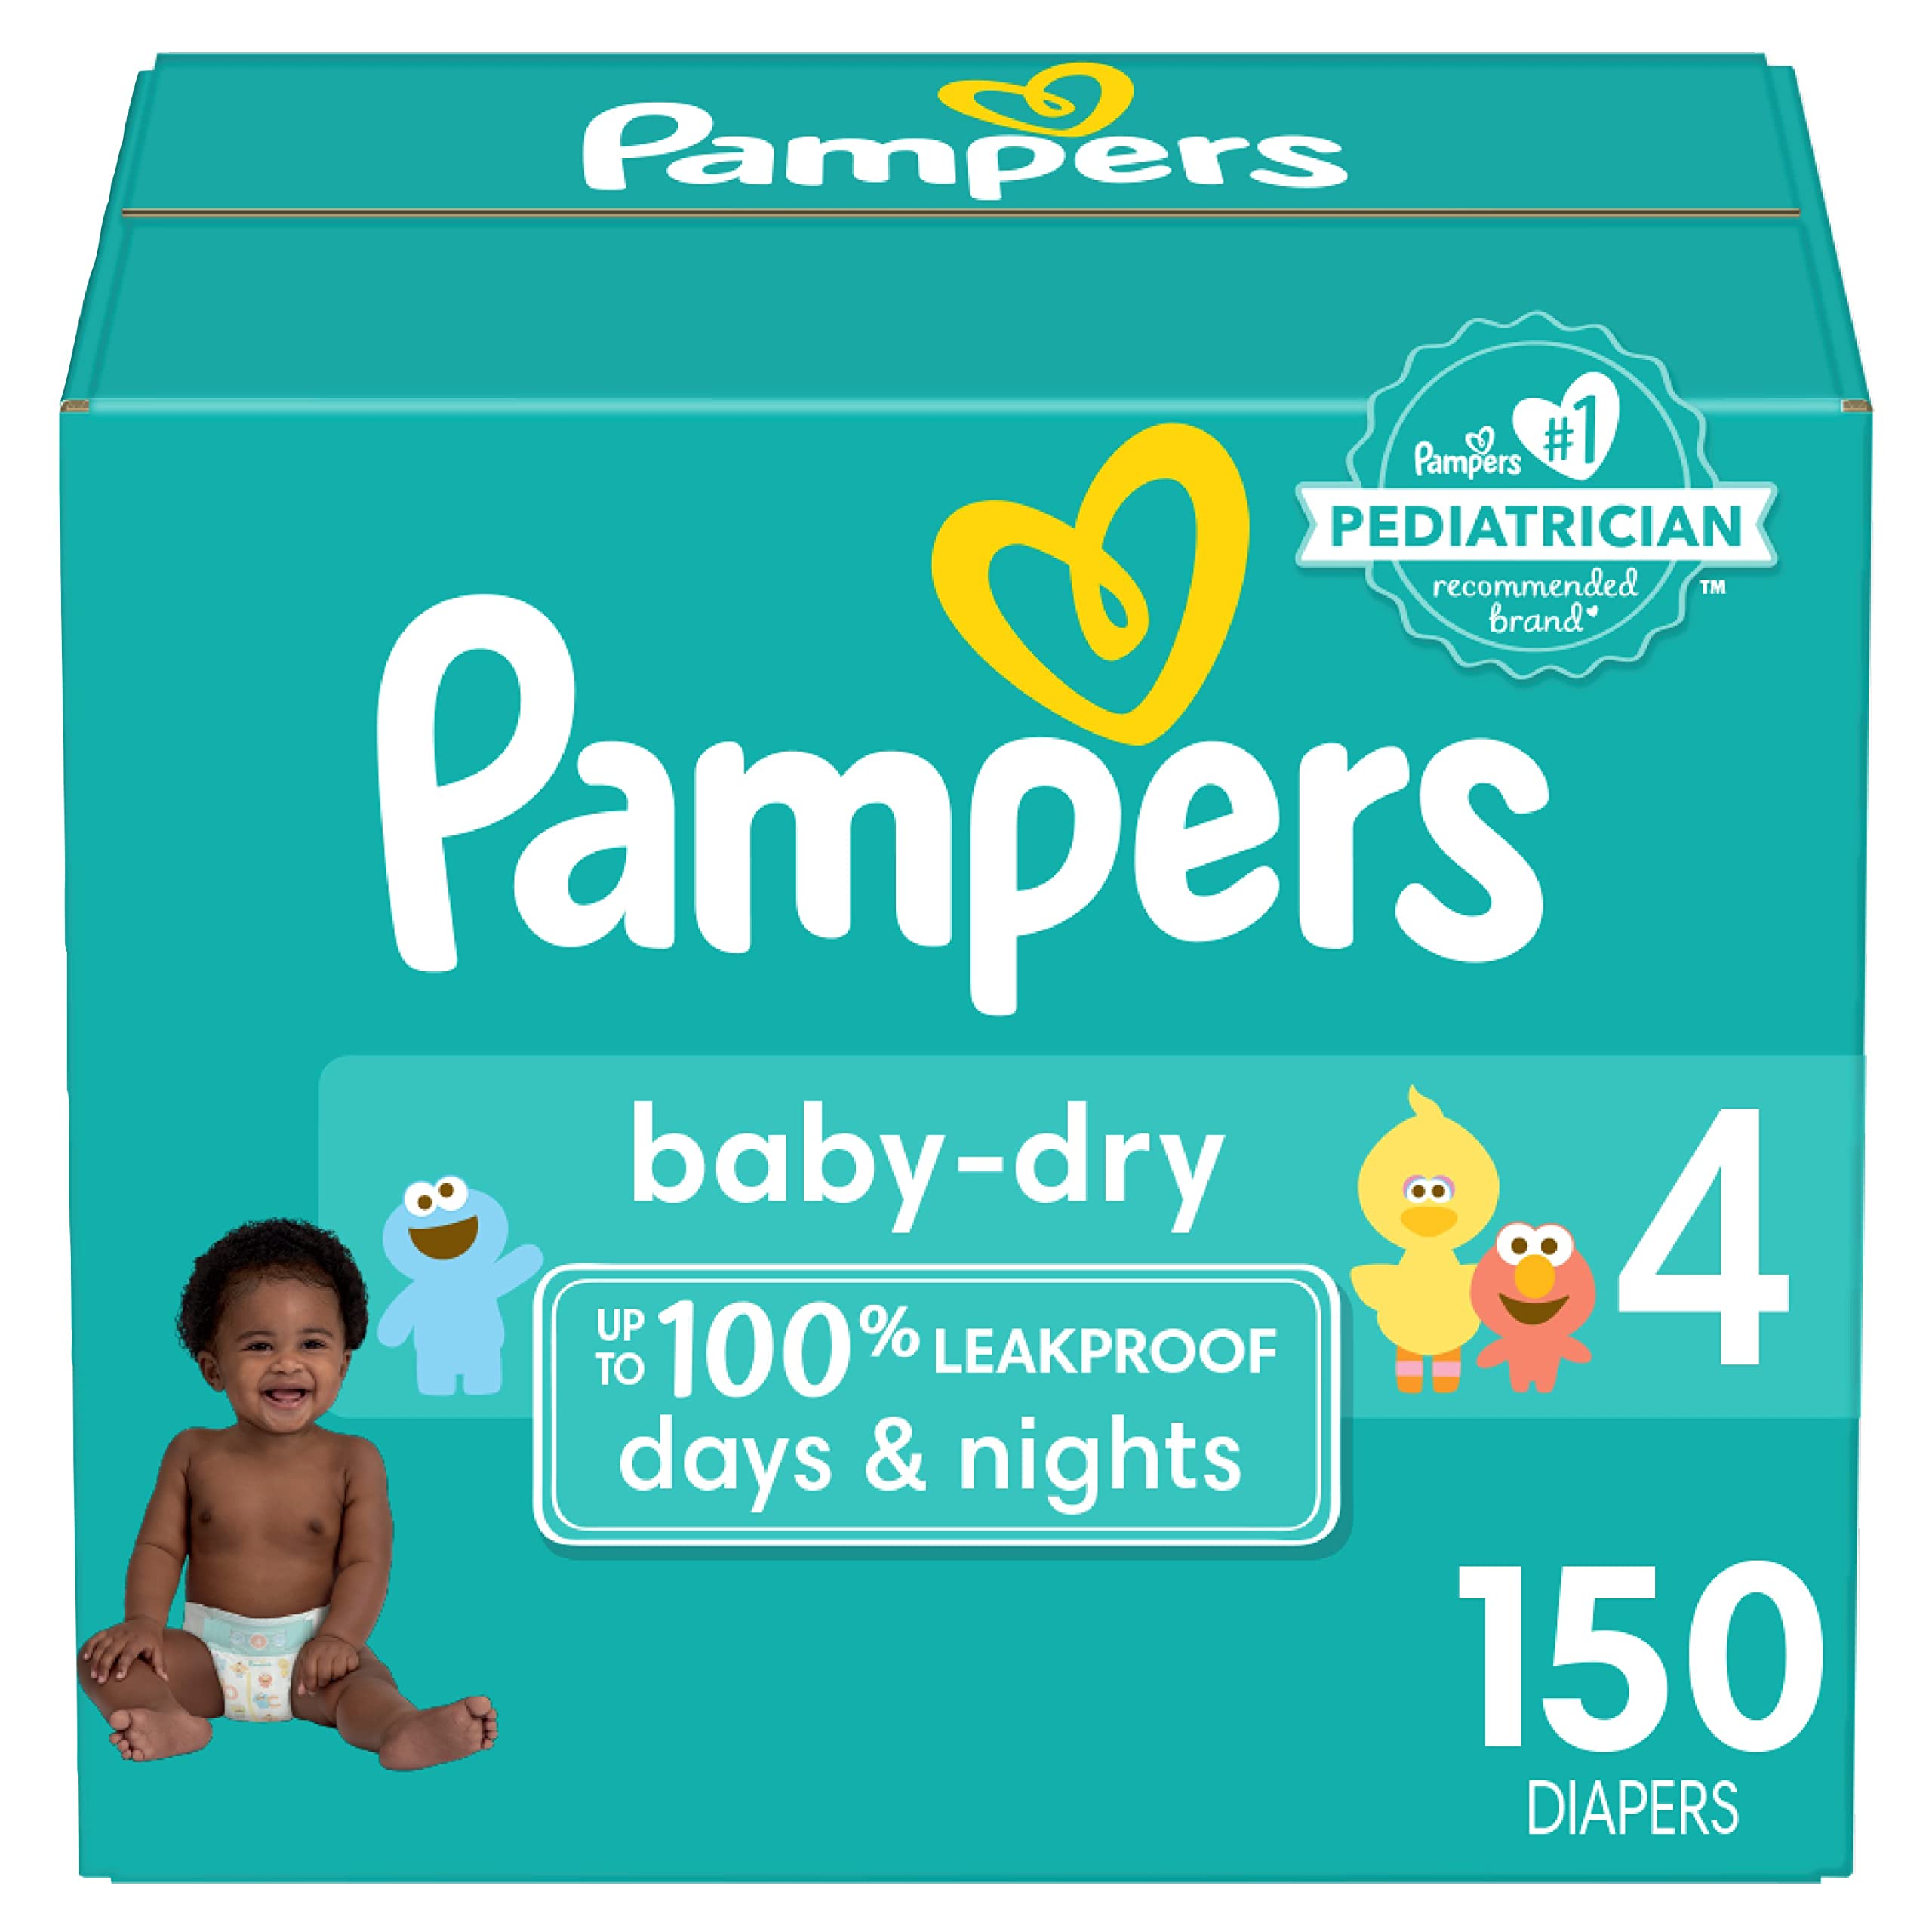 pampers 4 active baby night